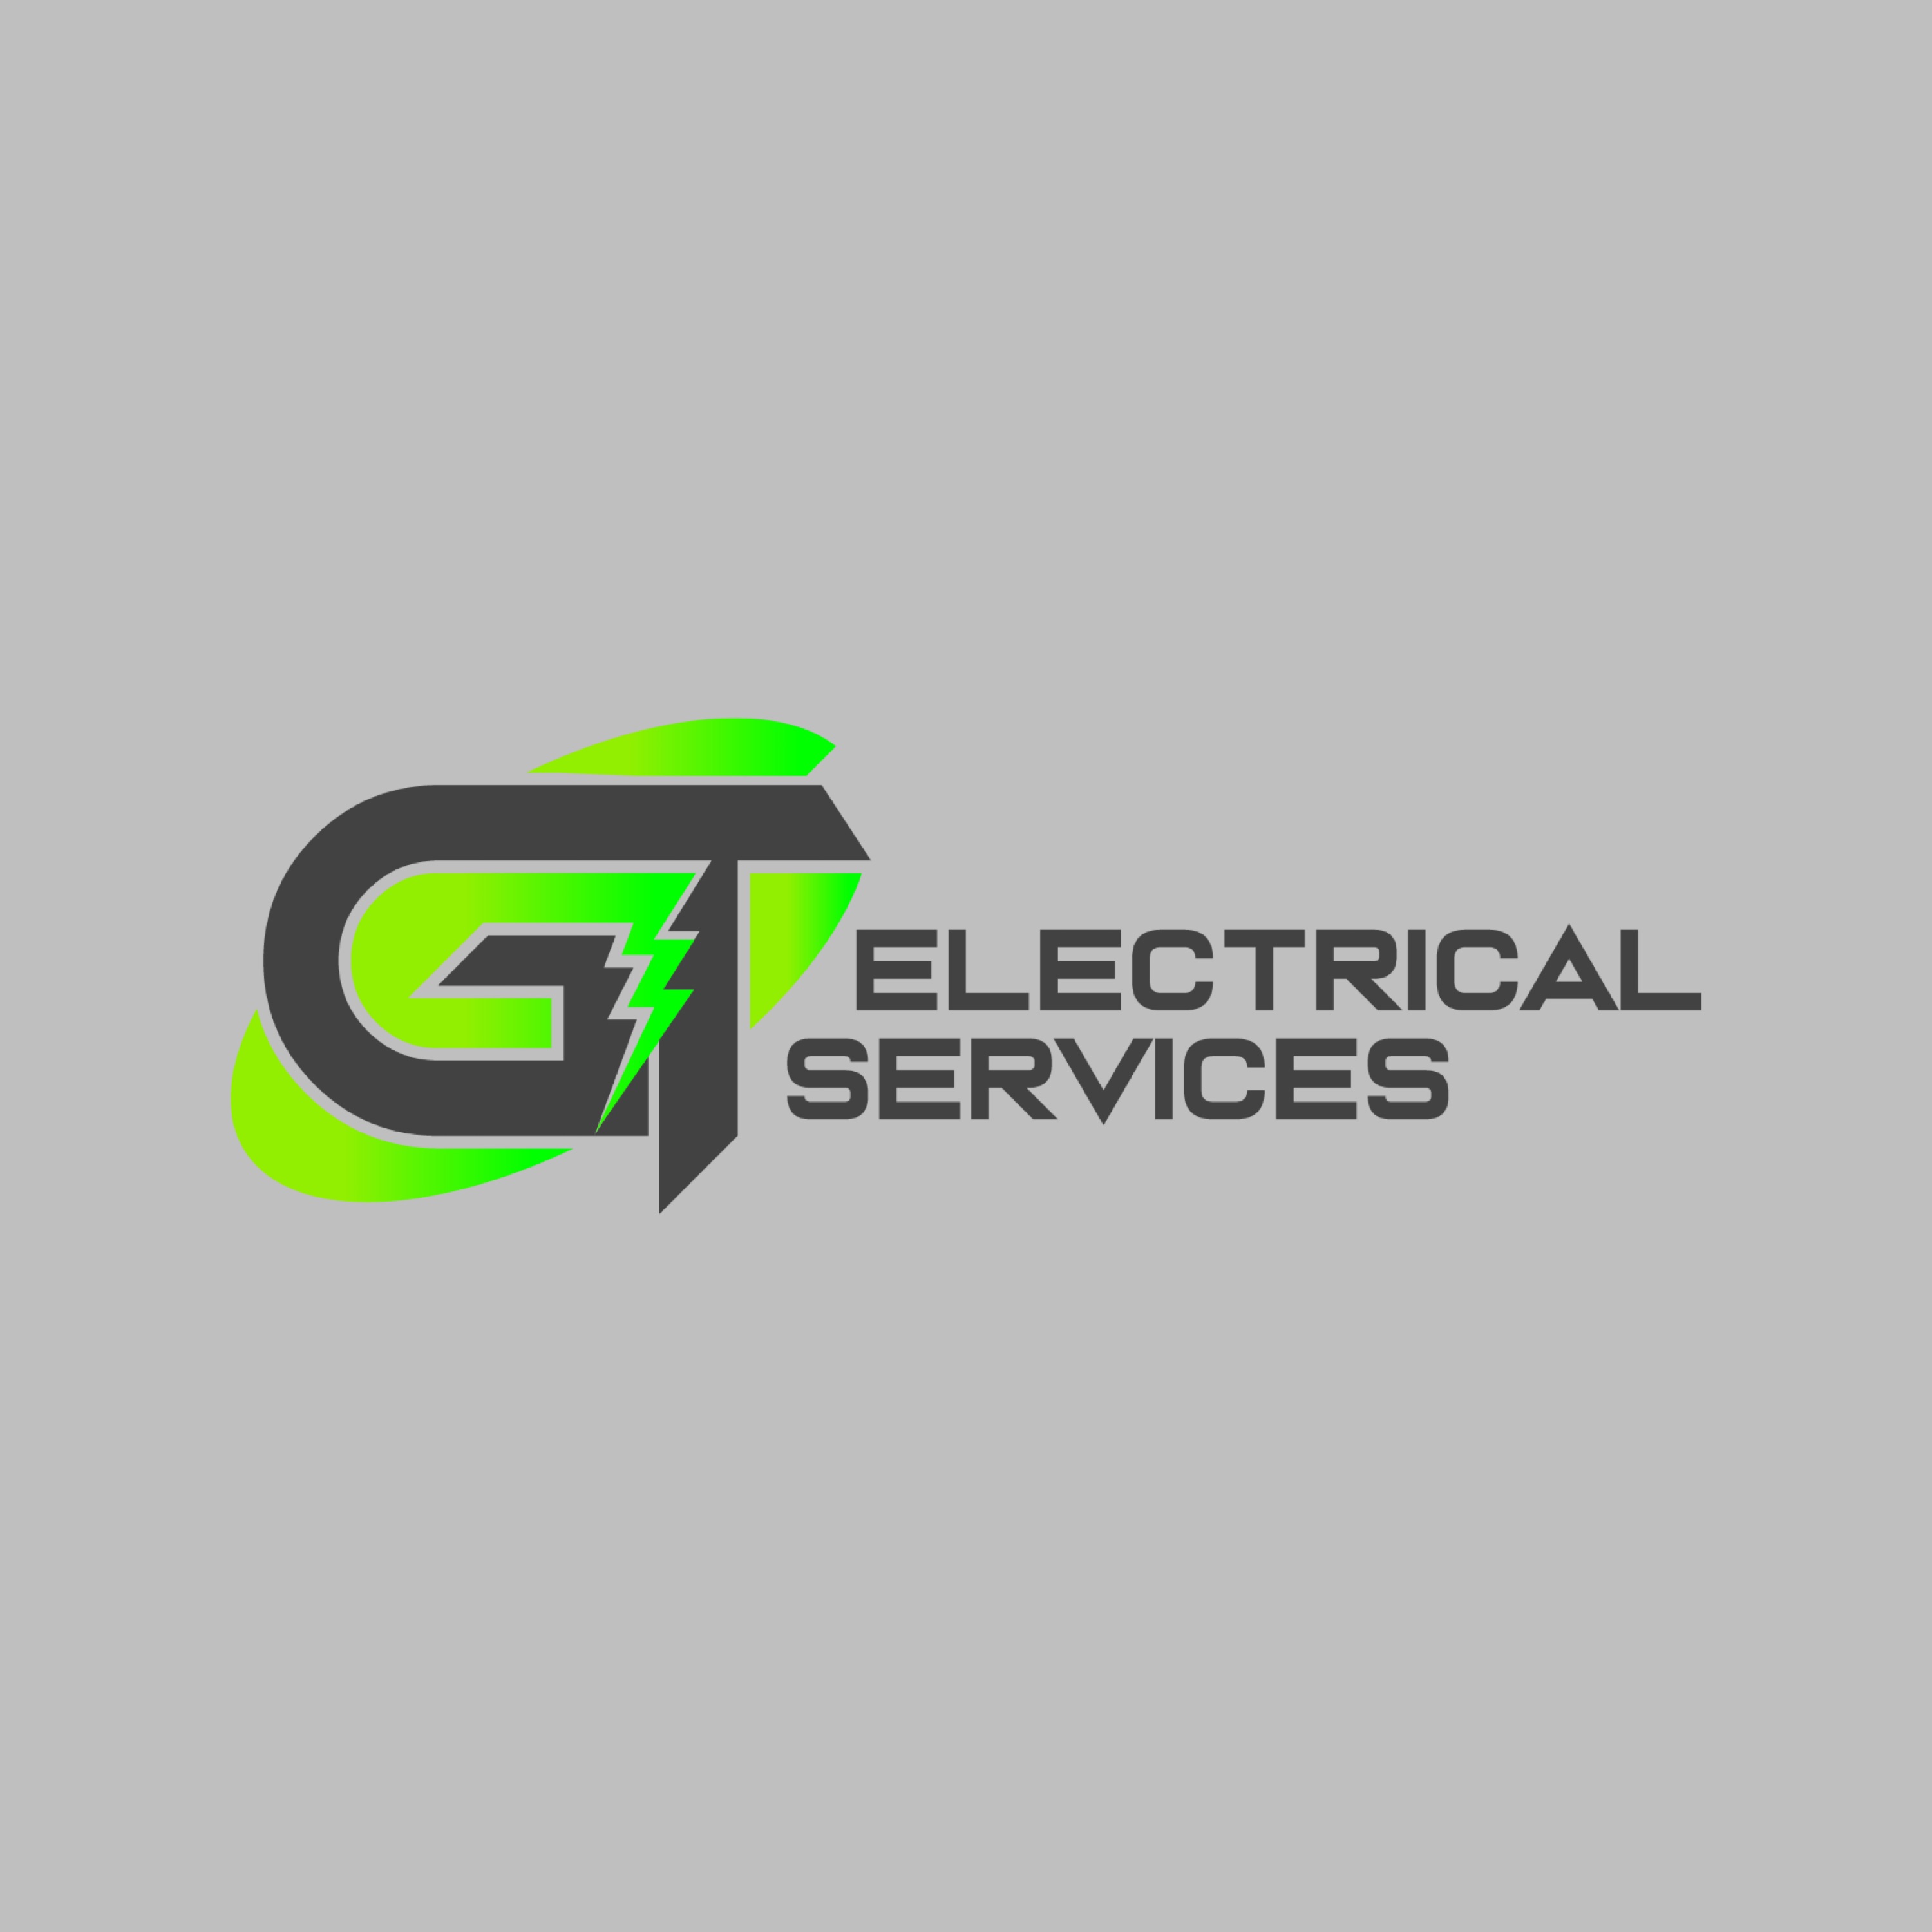 GT Electrical Services Logo